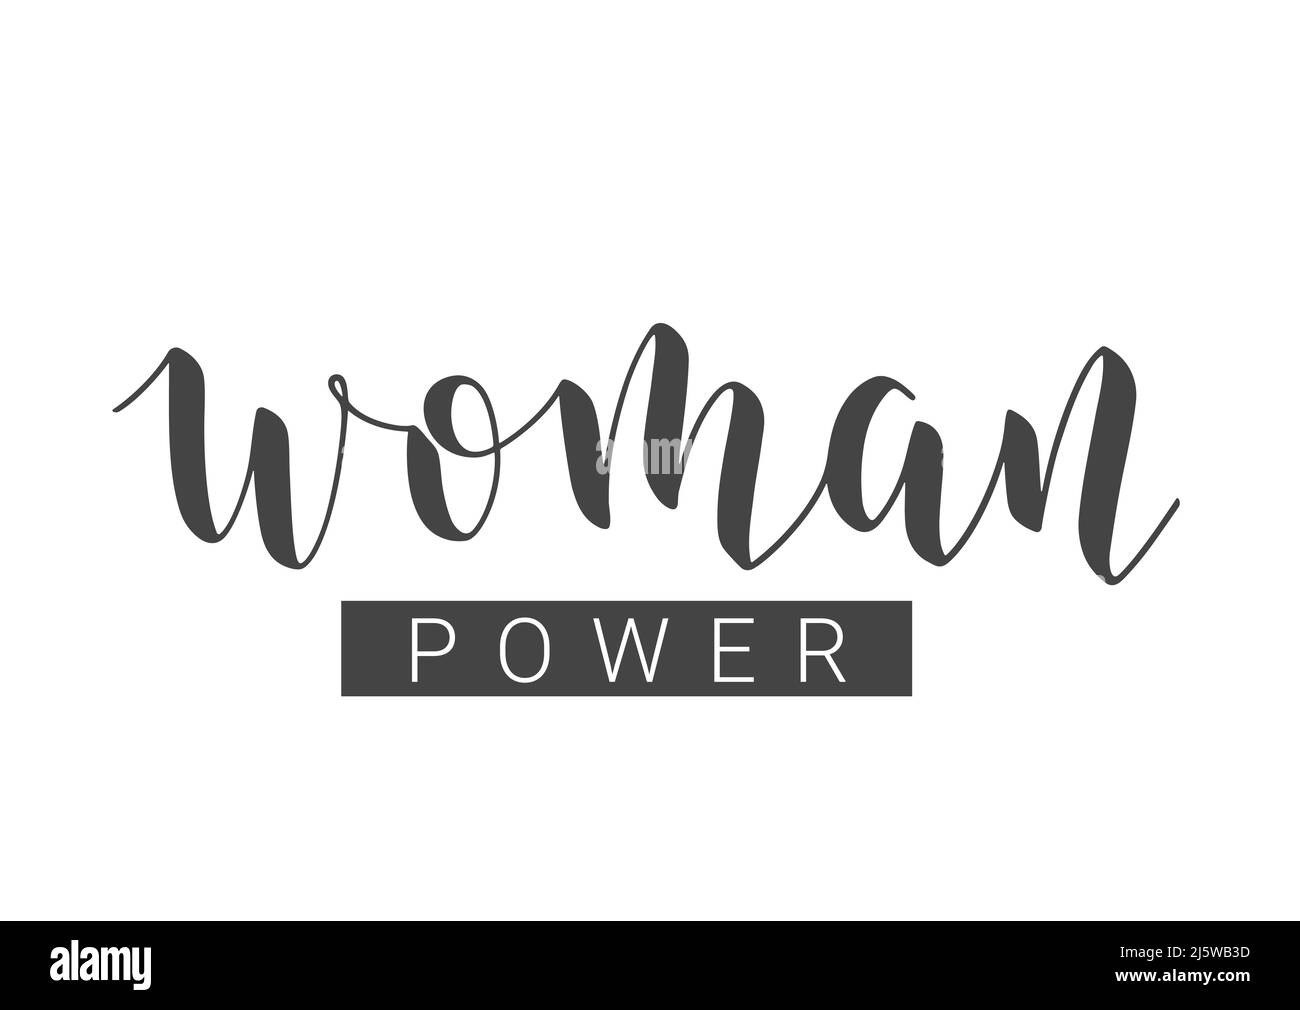 Vector Stock Illustration. Handwritten Lettering of Woman Power. Template for Card, Label, Postcard, Poster, Sticker, Print or Web Product. Stock Vector